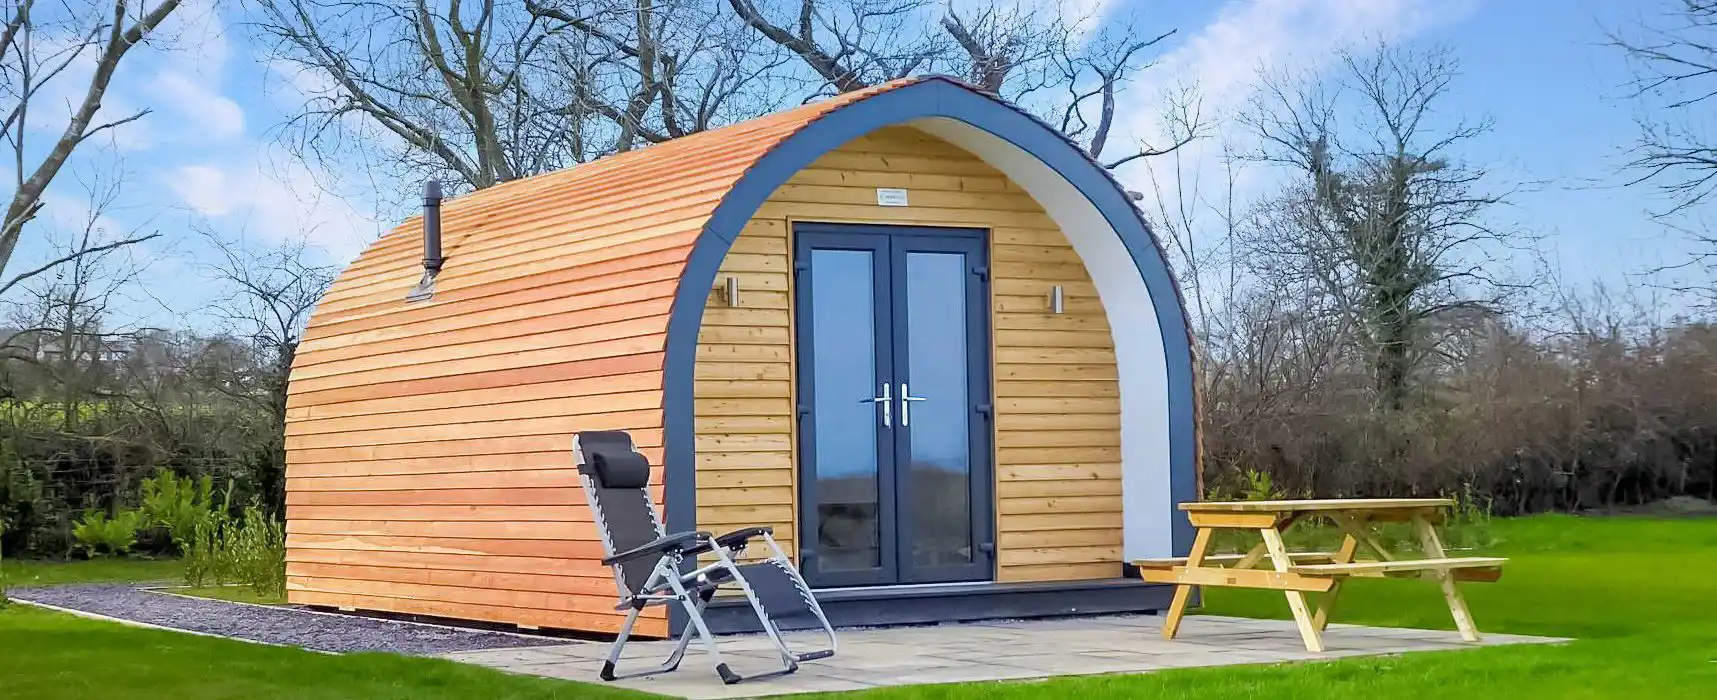 Camping and glamping pods in Chester